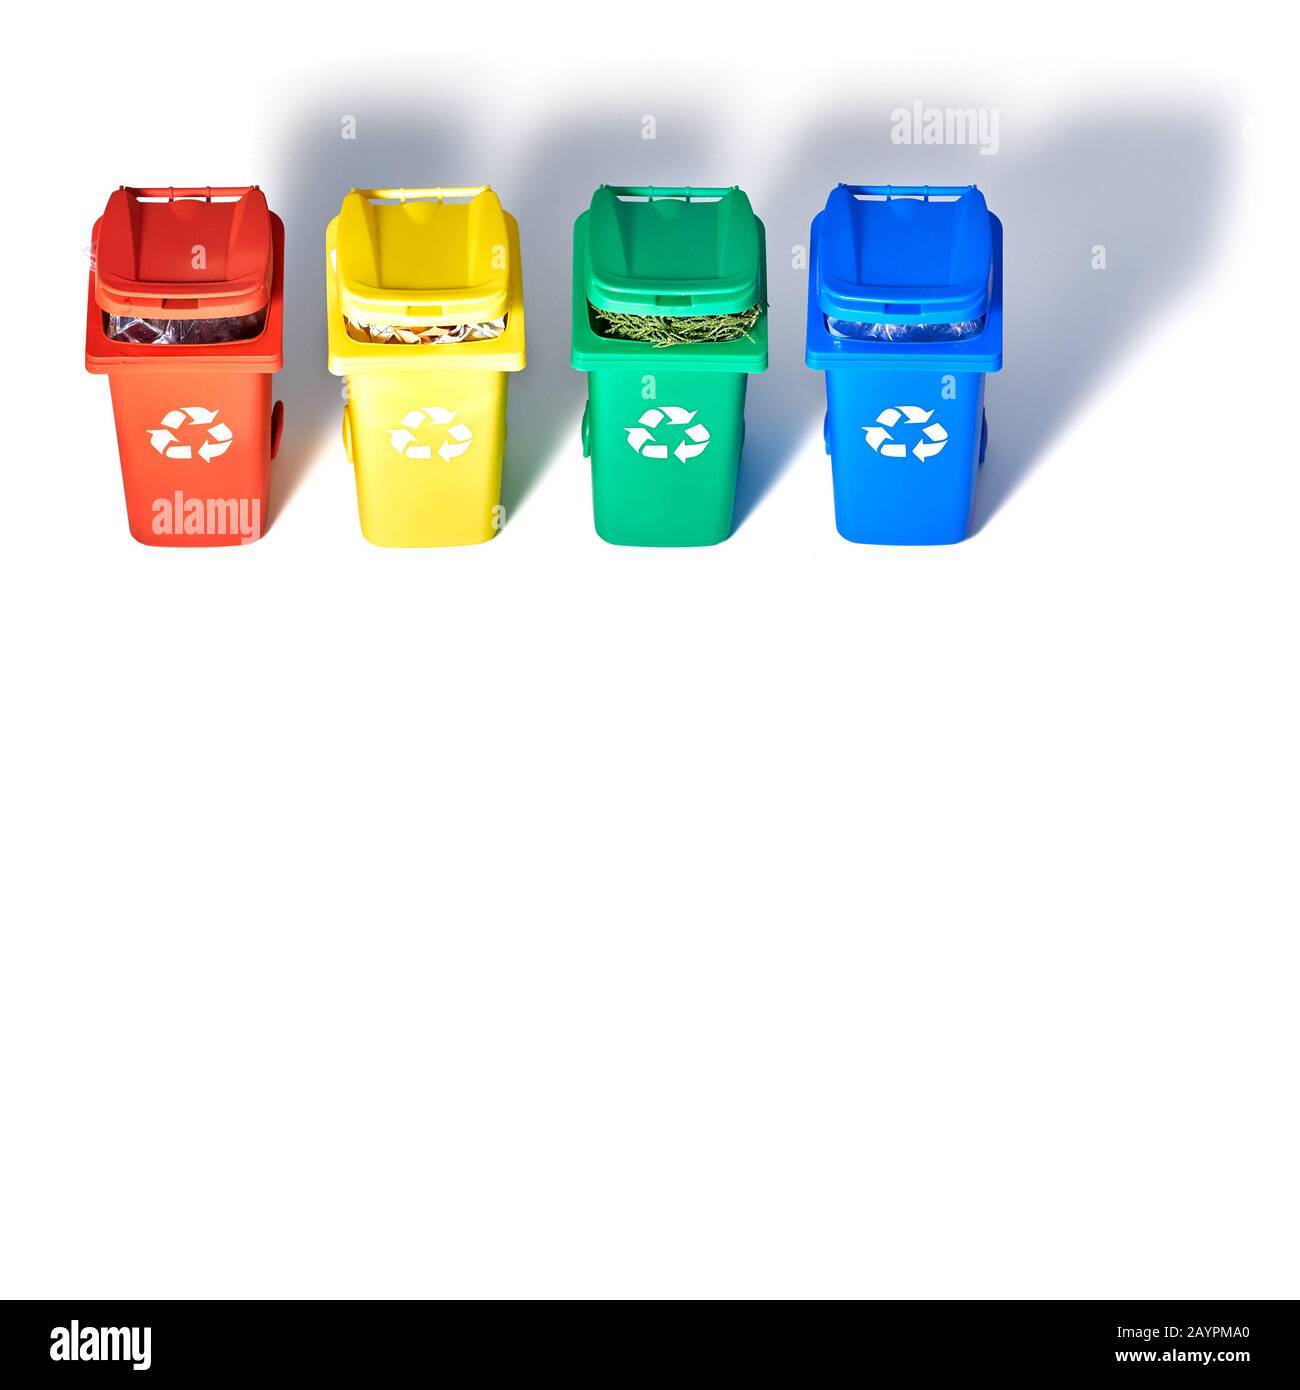 Four color coded recycle bins, isometric projection on geometric rainbow paper background with copy-space. Recycling sign on the bins - red, blue, yel Stock Photo